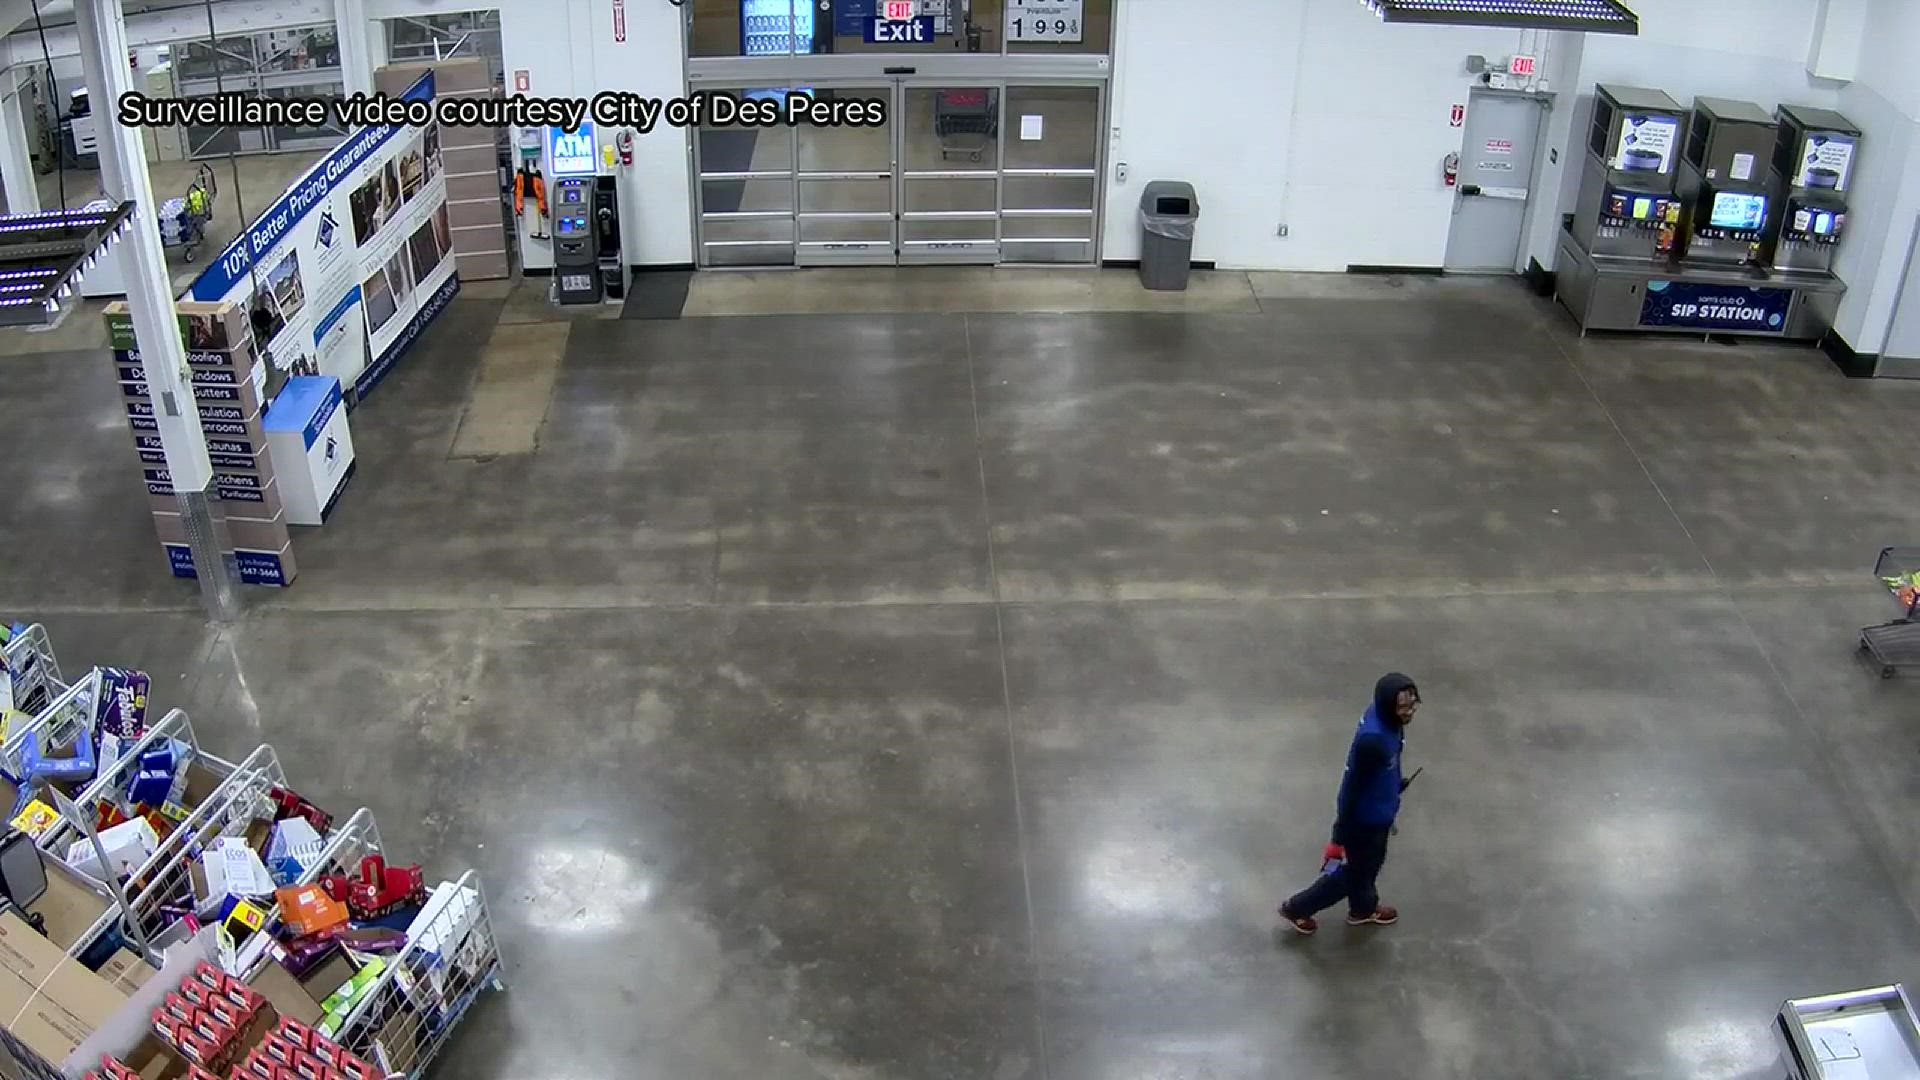 Des Peres City Attorney Chris Graville released surveillance video inside Sam's Club showing the arrest that prompted a lawsuit.